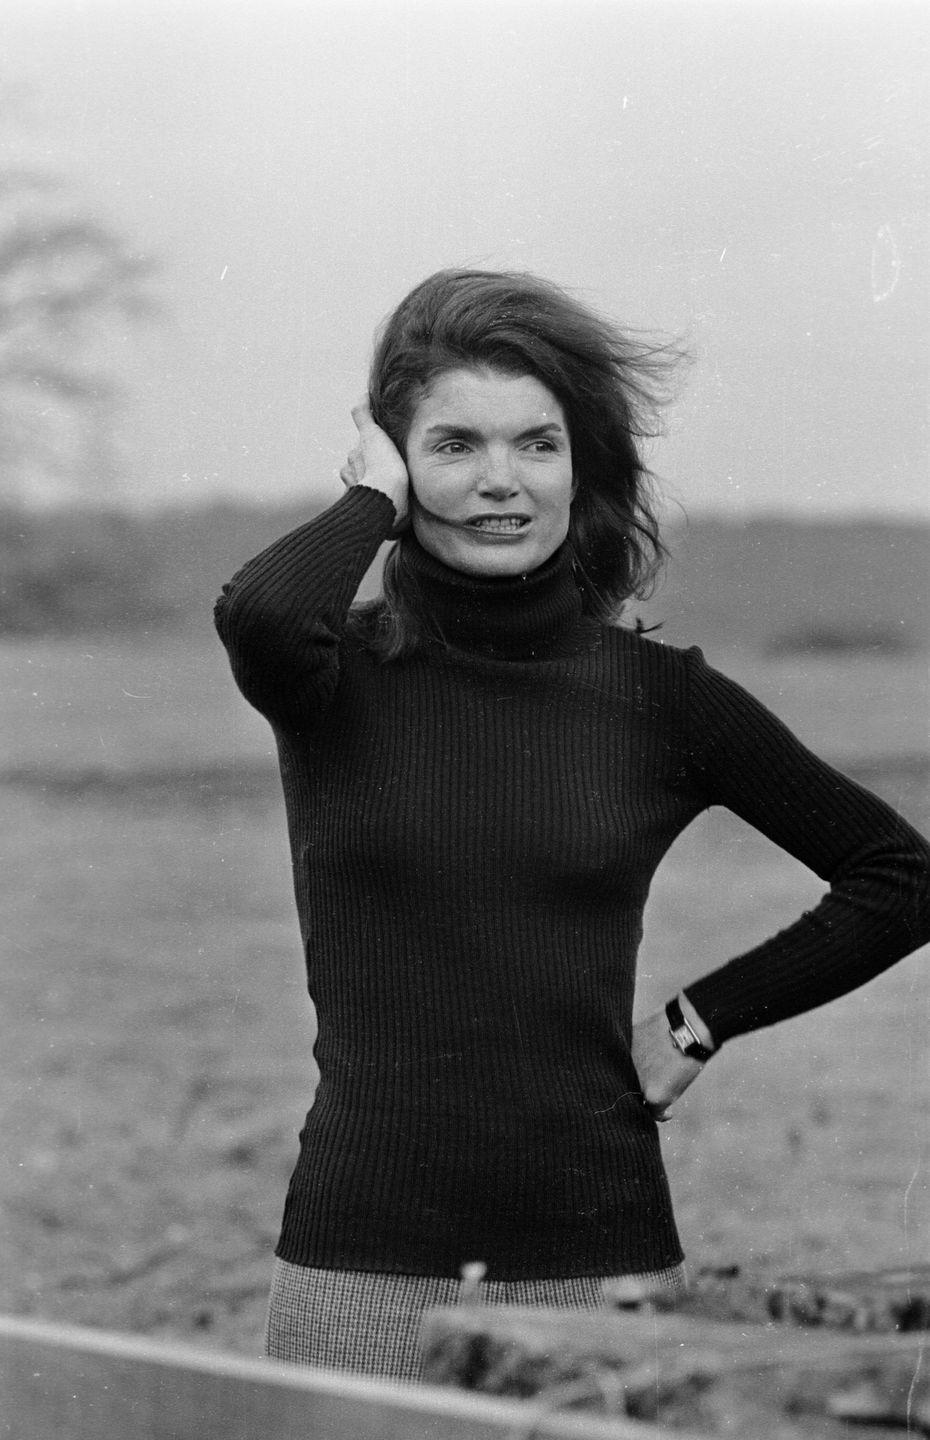 1969: Jacqueline Kennedy Onassis vacations during the New Year